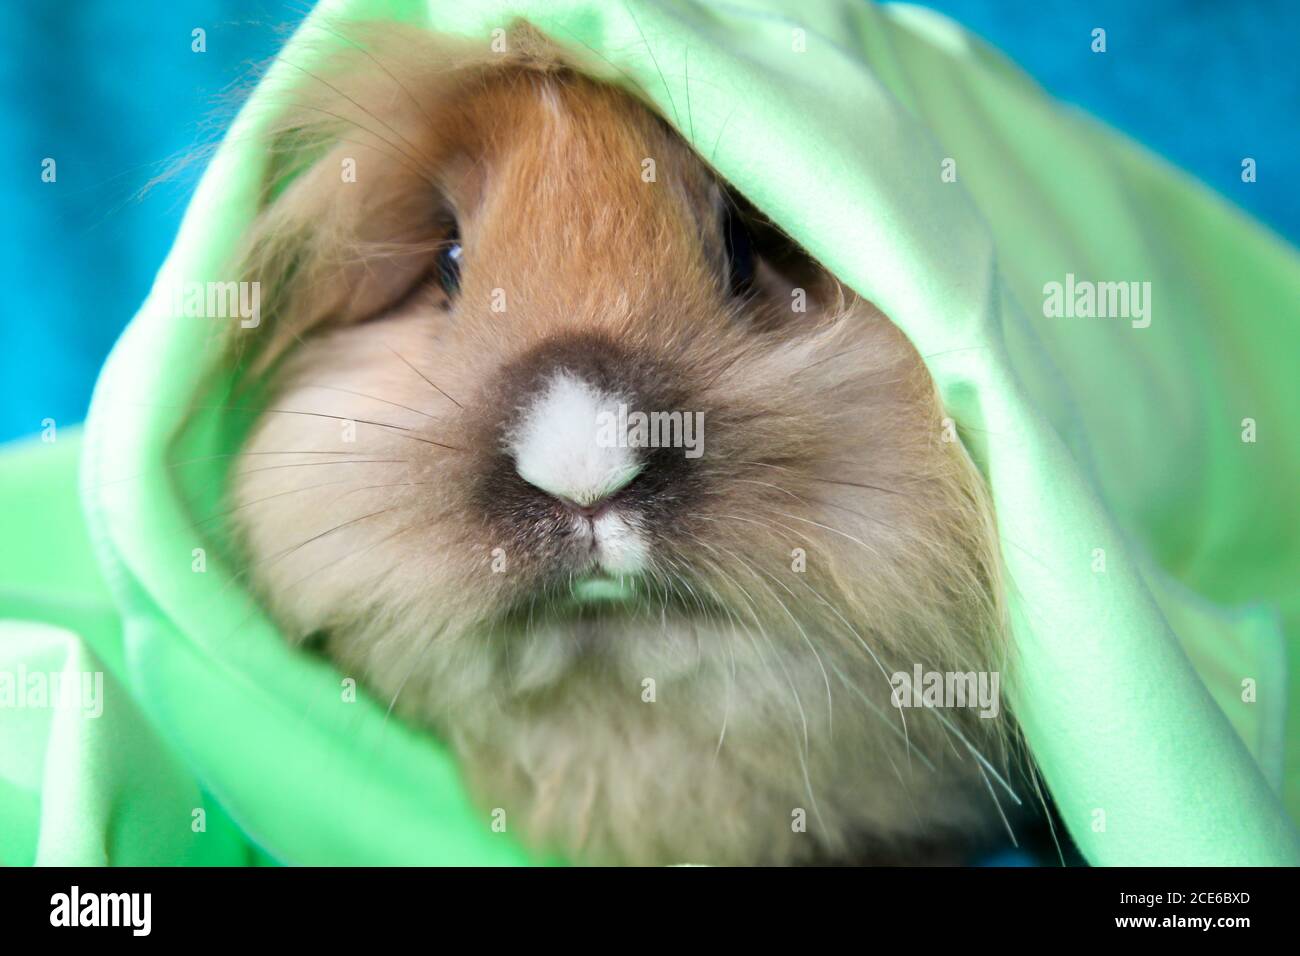 Photo shoot with a young dwarf rabbit Stock Photo